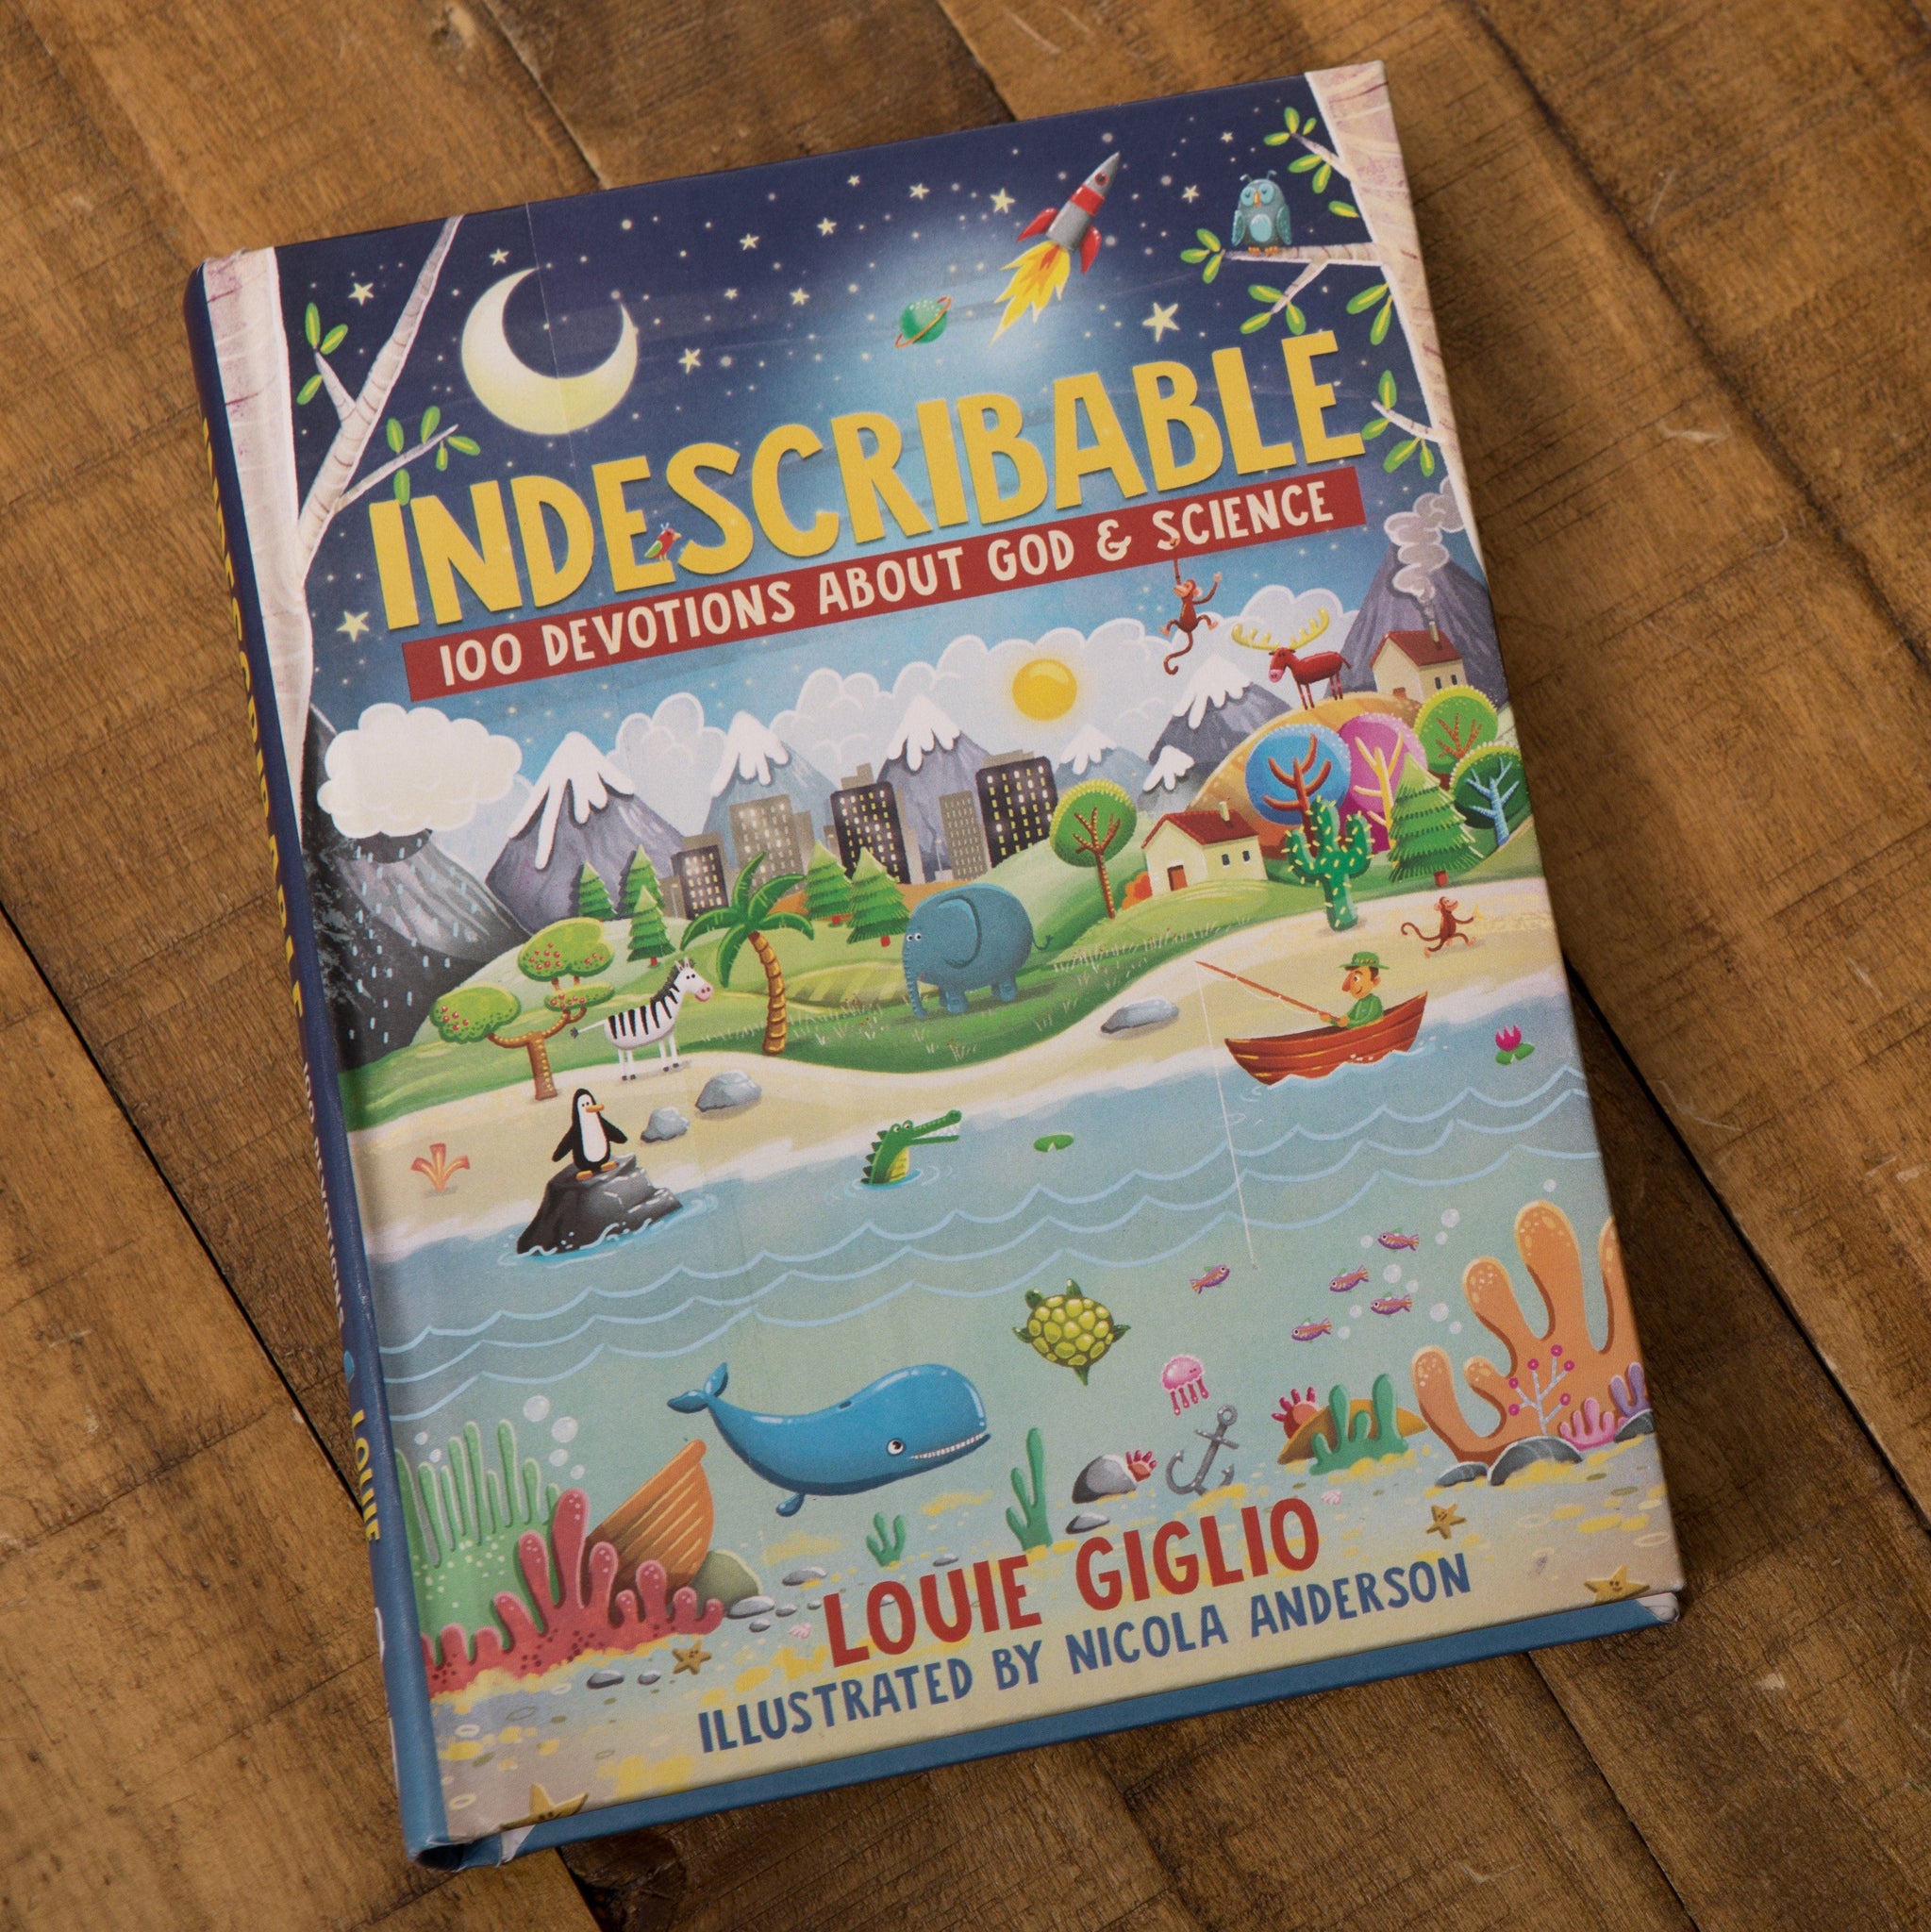 Indescribable for Kids: 100 Devotions About God and Science (Ages